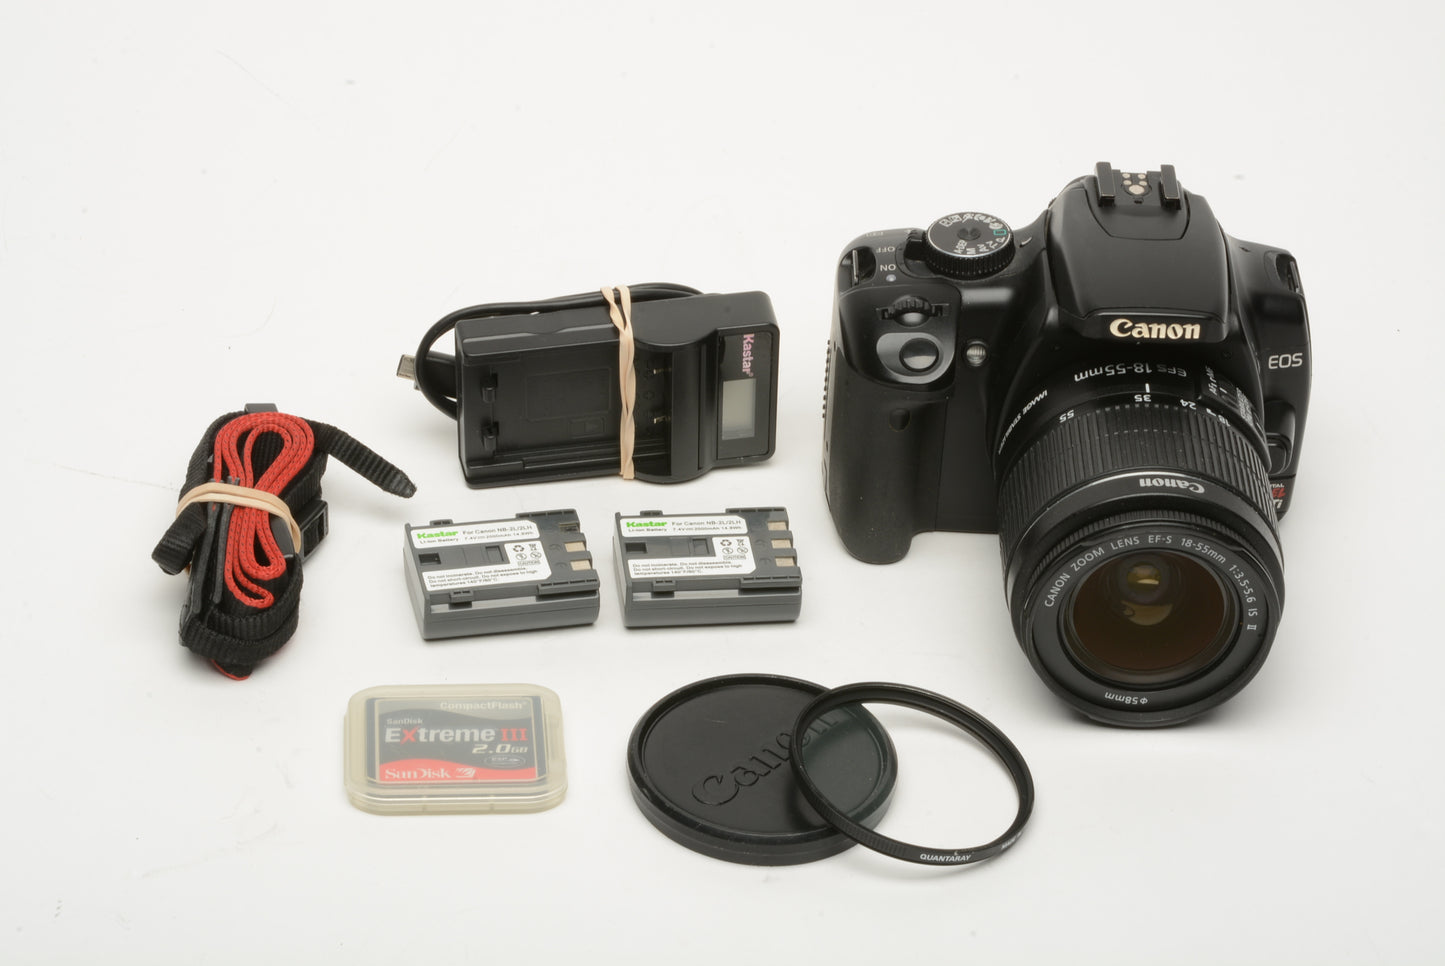 Canon Rebel XTi DSLR w/18-55mm f3.5-5.6 IS II, 2batts, charger, 2GB CF card, tested